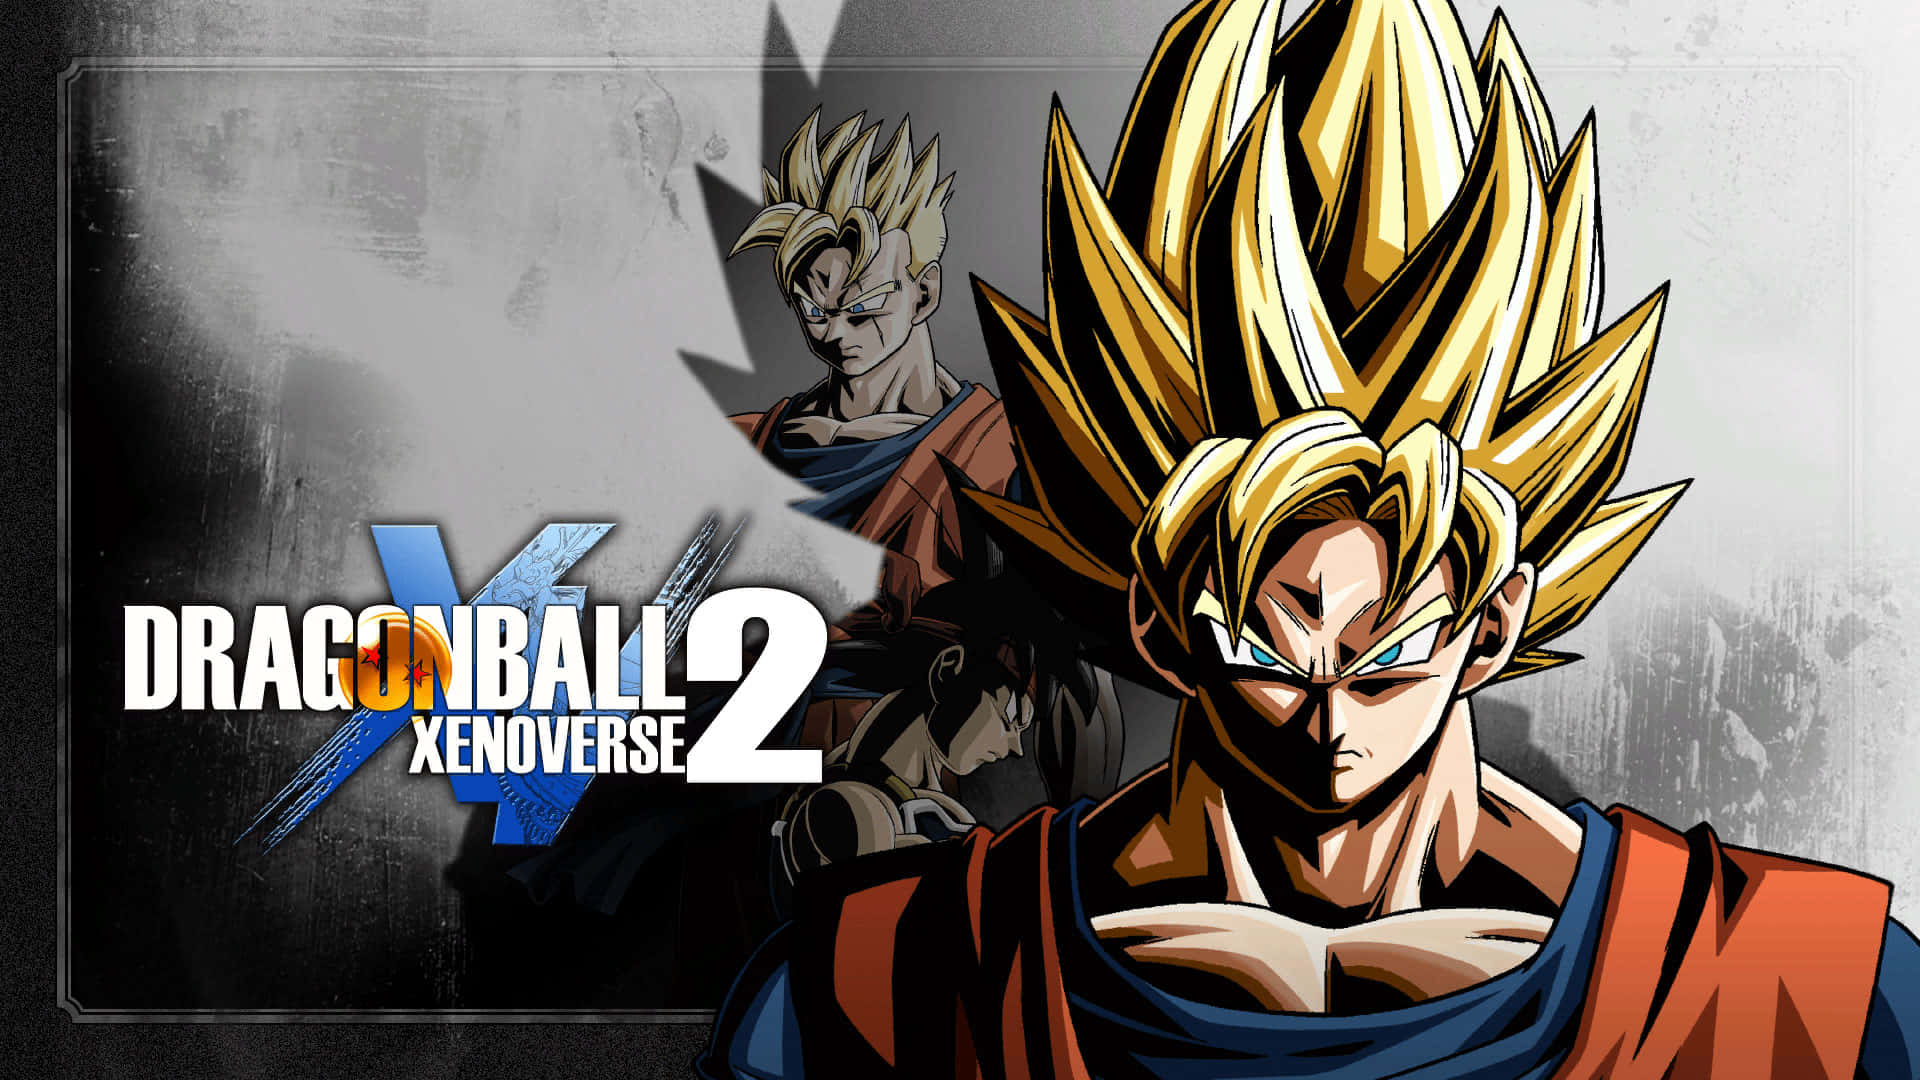 Play as your favorite Dragon Ball Z character in Dragon Ball Xenoverse 2. Wallpaper